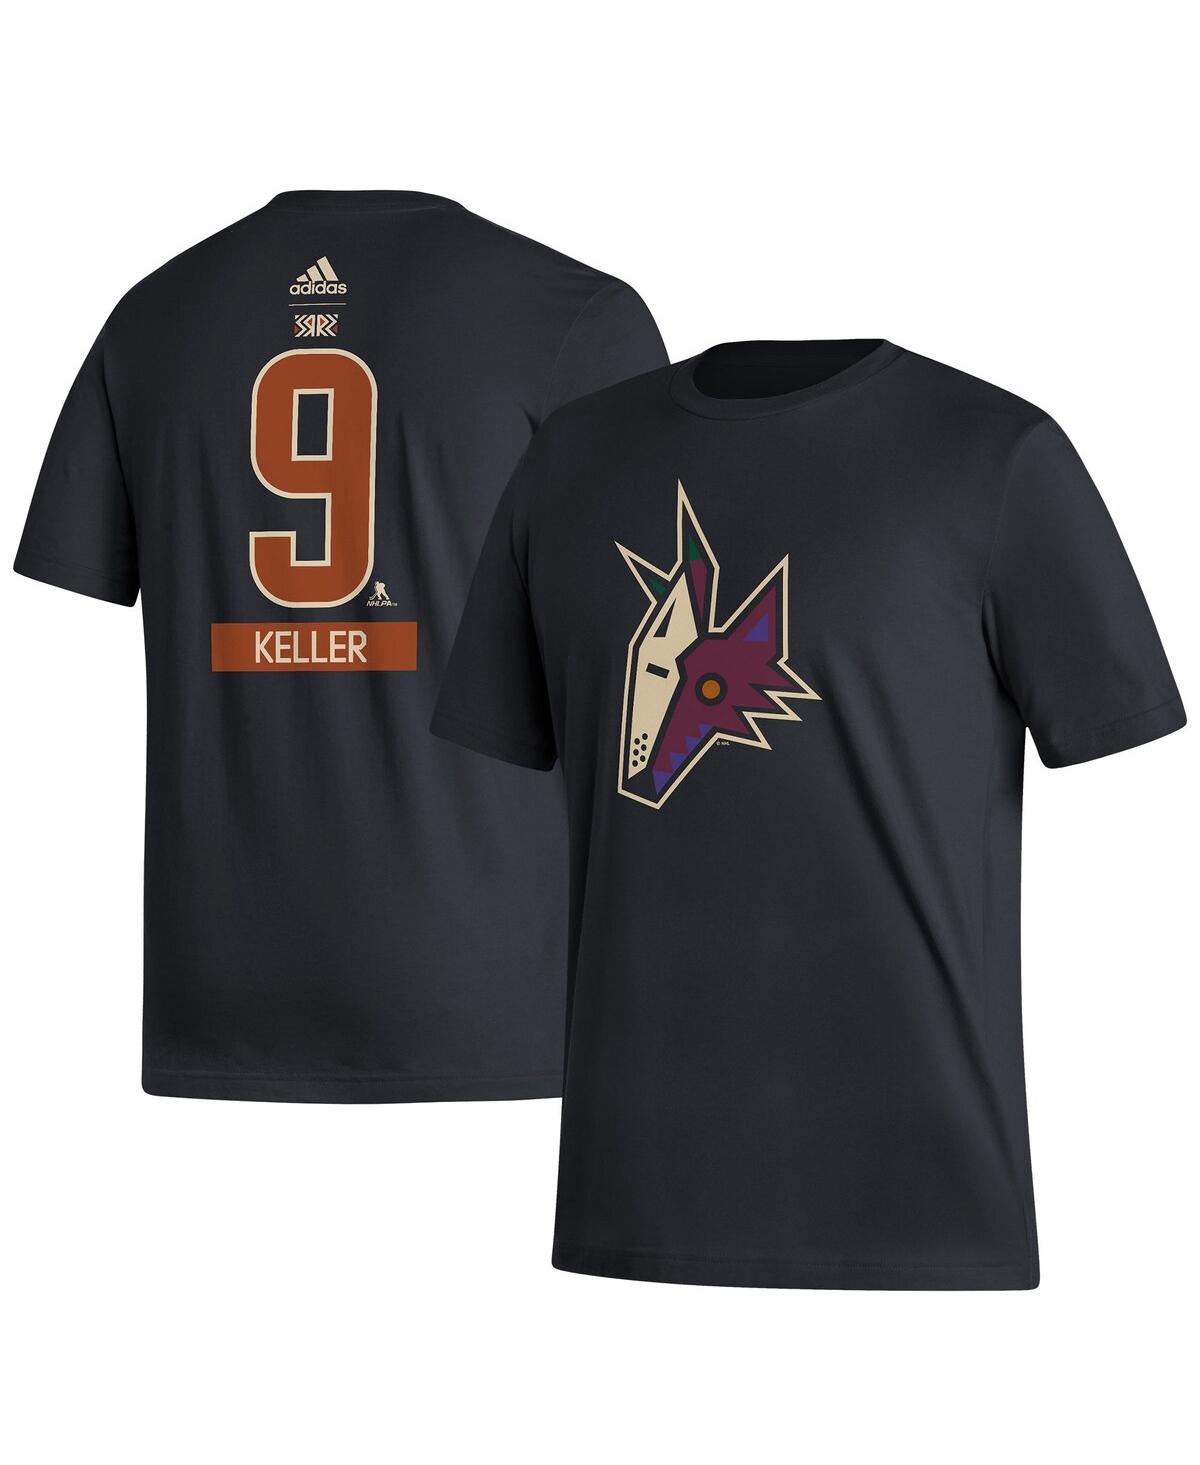 Arizona Coyotes reveal their Black Excellence warm up jerseys in